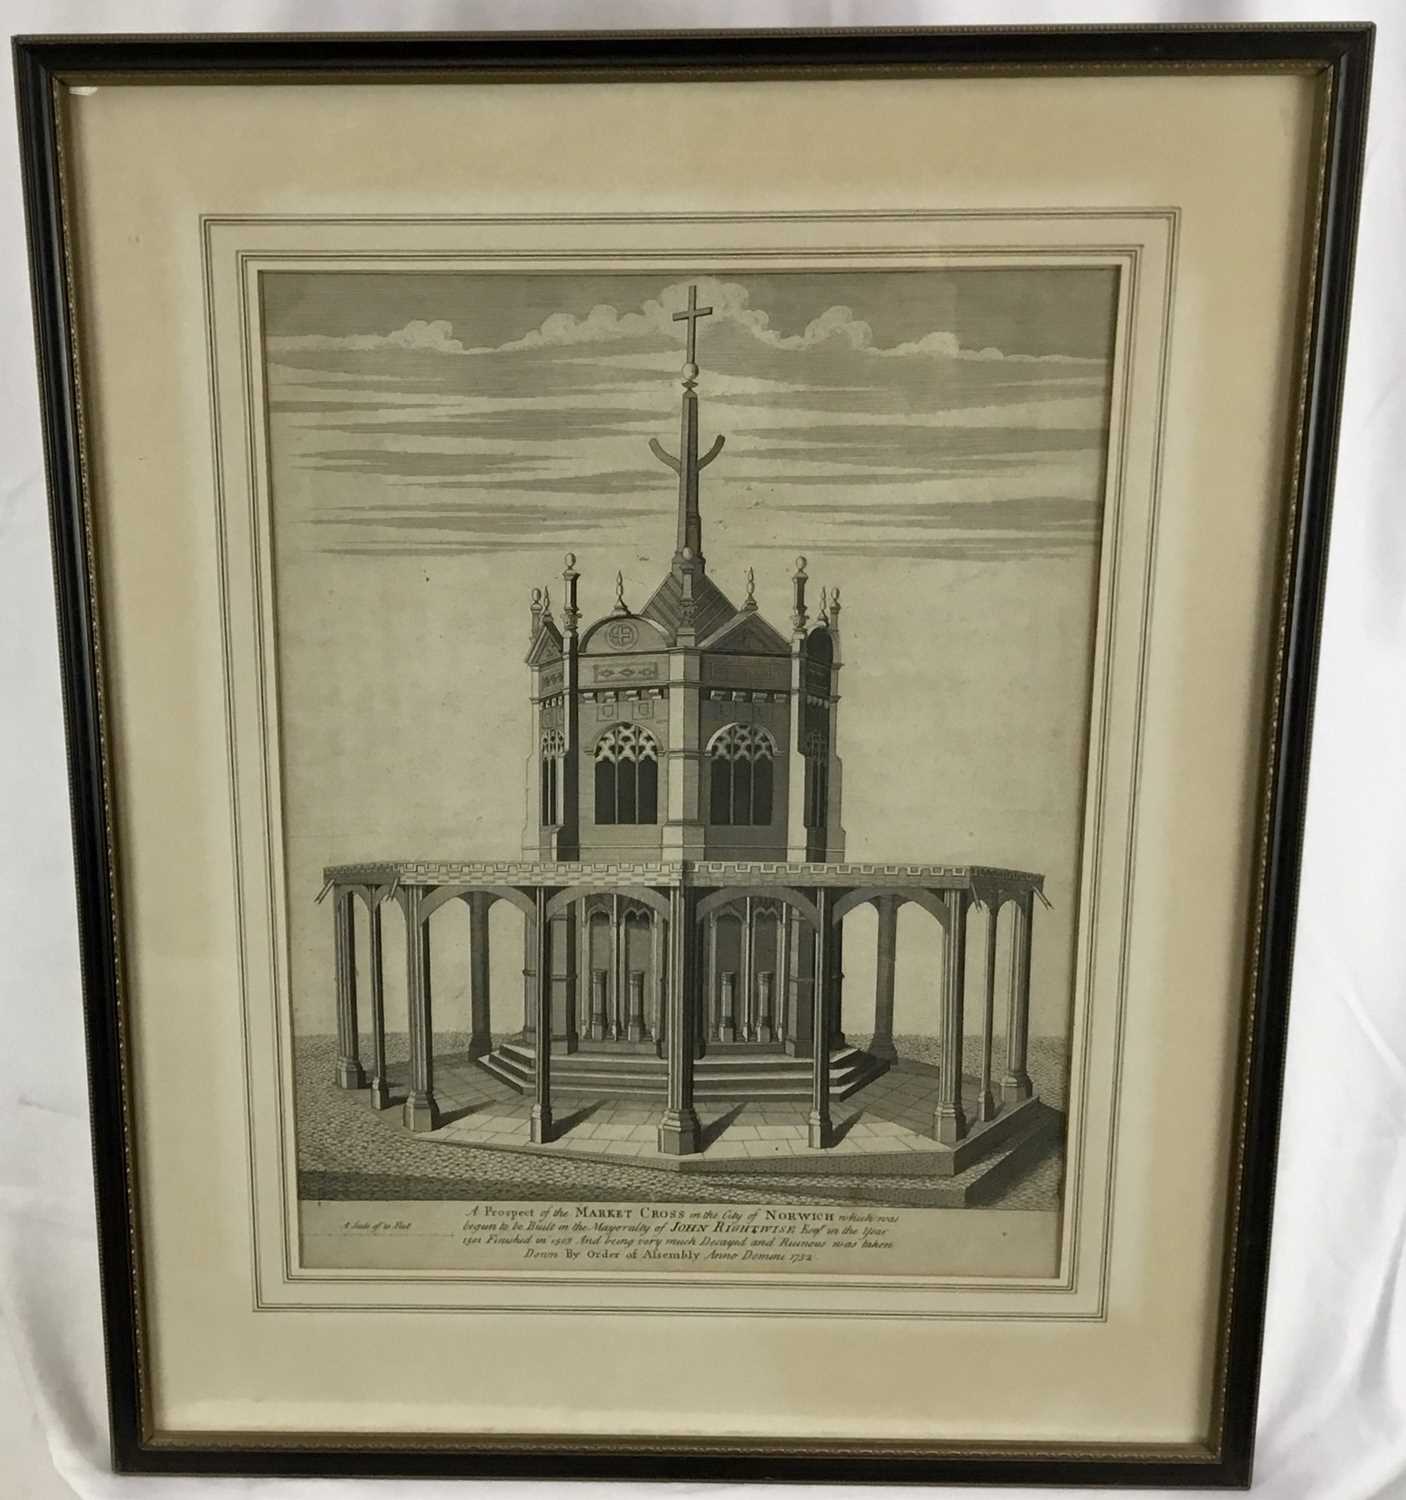 Lot 71 - Antique engraving - Market cross, Norwich, 34cm x 44cm, mounted in glazed Hogarth frame 52cm x 63cm overall